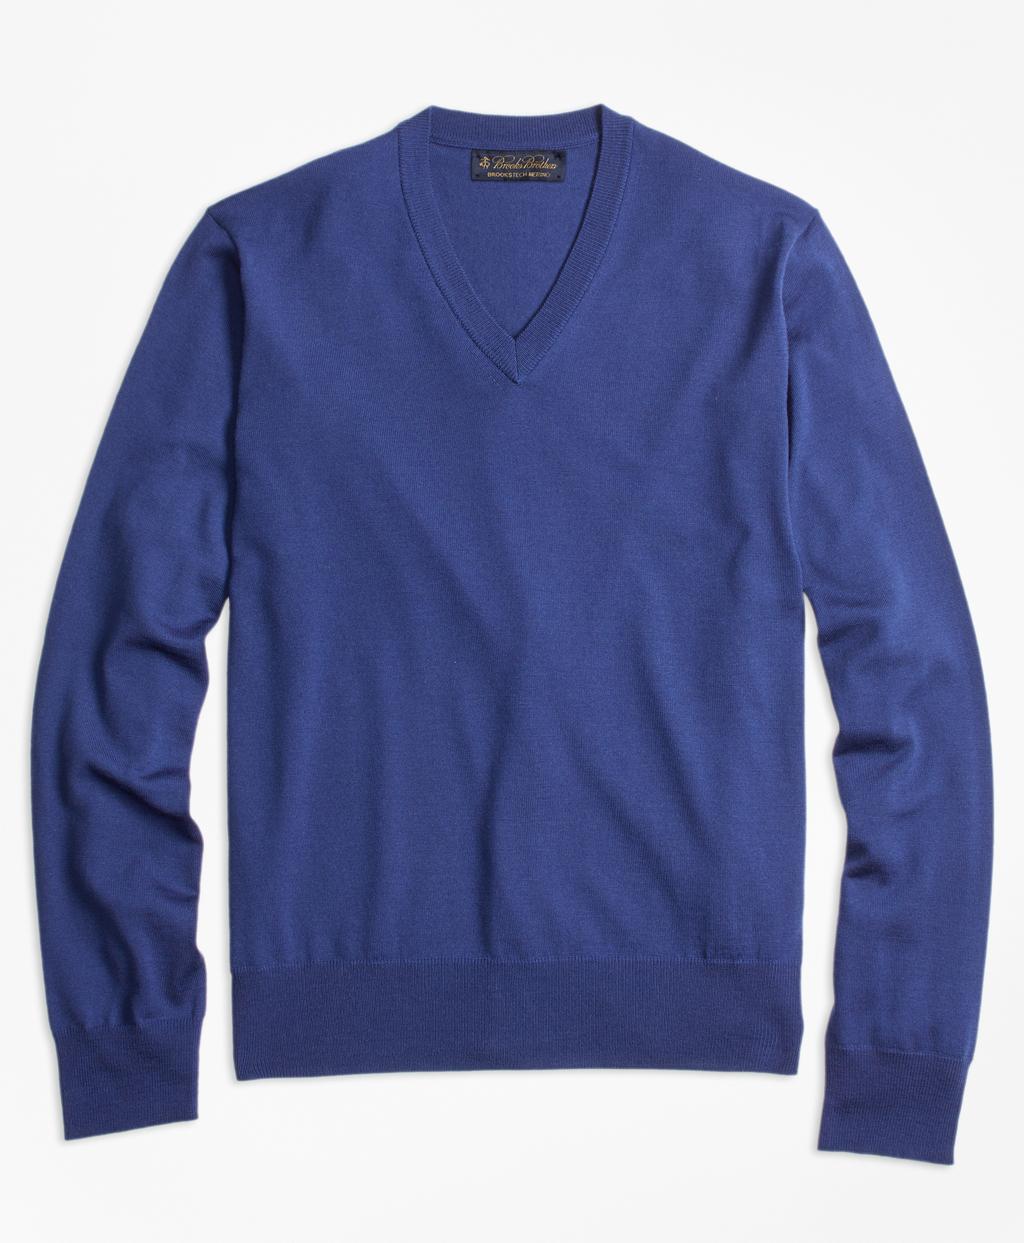 Lyst - Brooks Brothers Brookstech Merino Wool V-neck Sweater in Blue ...